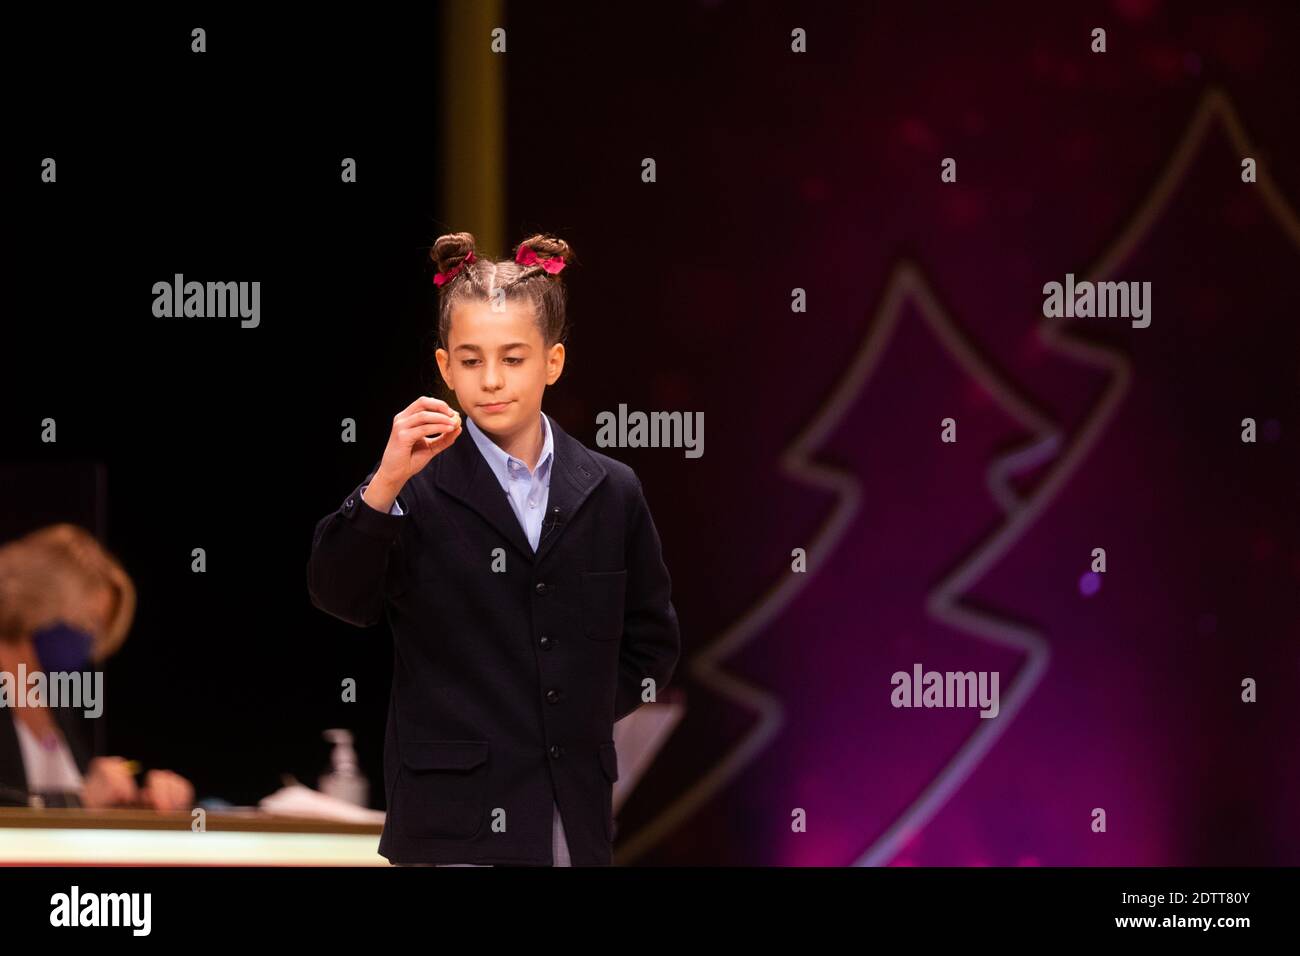 Madrid, Spain. 22 December, 2020: Pupils of the San Ildefonso school, hold the ball bearing of the third prize number during the draw of Spain's Christmas lottery named 'El Gordo' (Fat One) at the Teatro Real on December 22, 2020 in Madrid, Spain. The third prize number is 52472, with a total of 500.000 euros for the prize to be shared between ten ticket holders. Credit: Jon Imanol Reino/Alfa Images /Alamy Live News Stock Photo